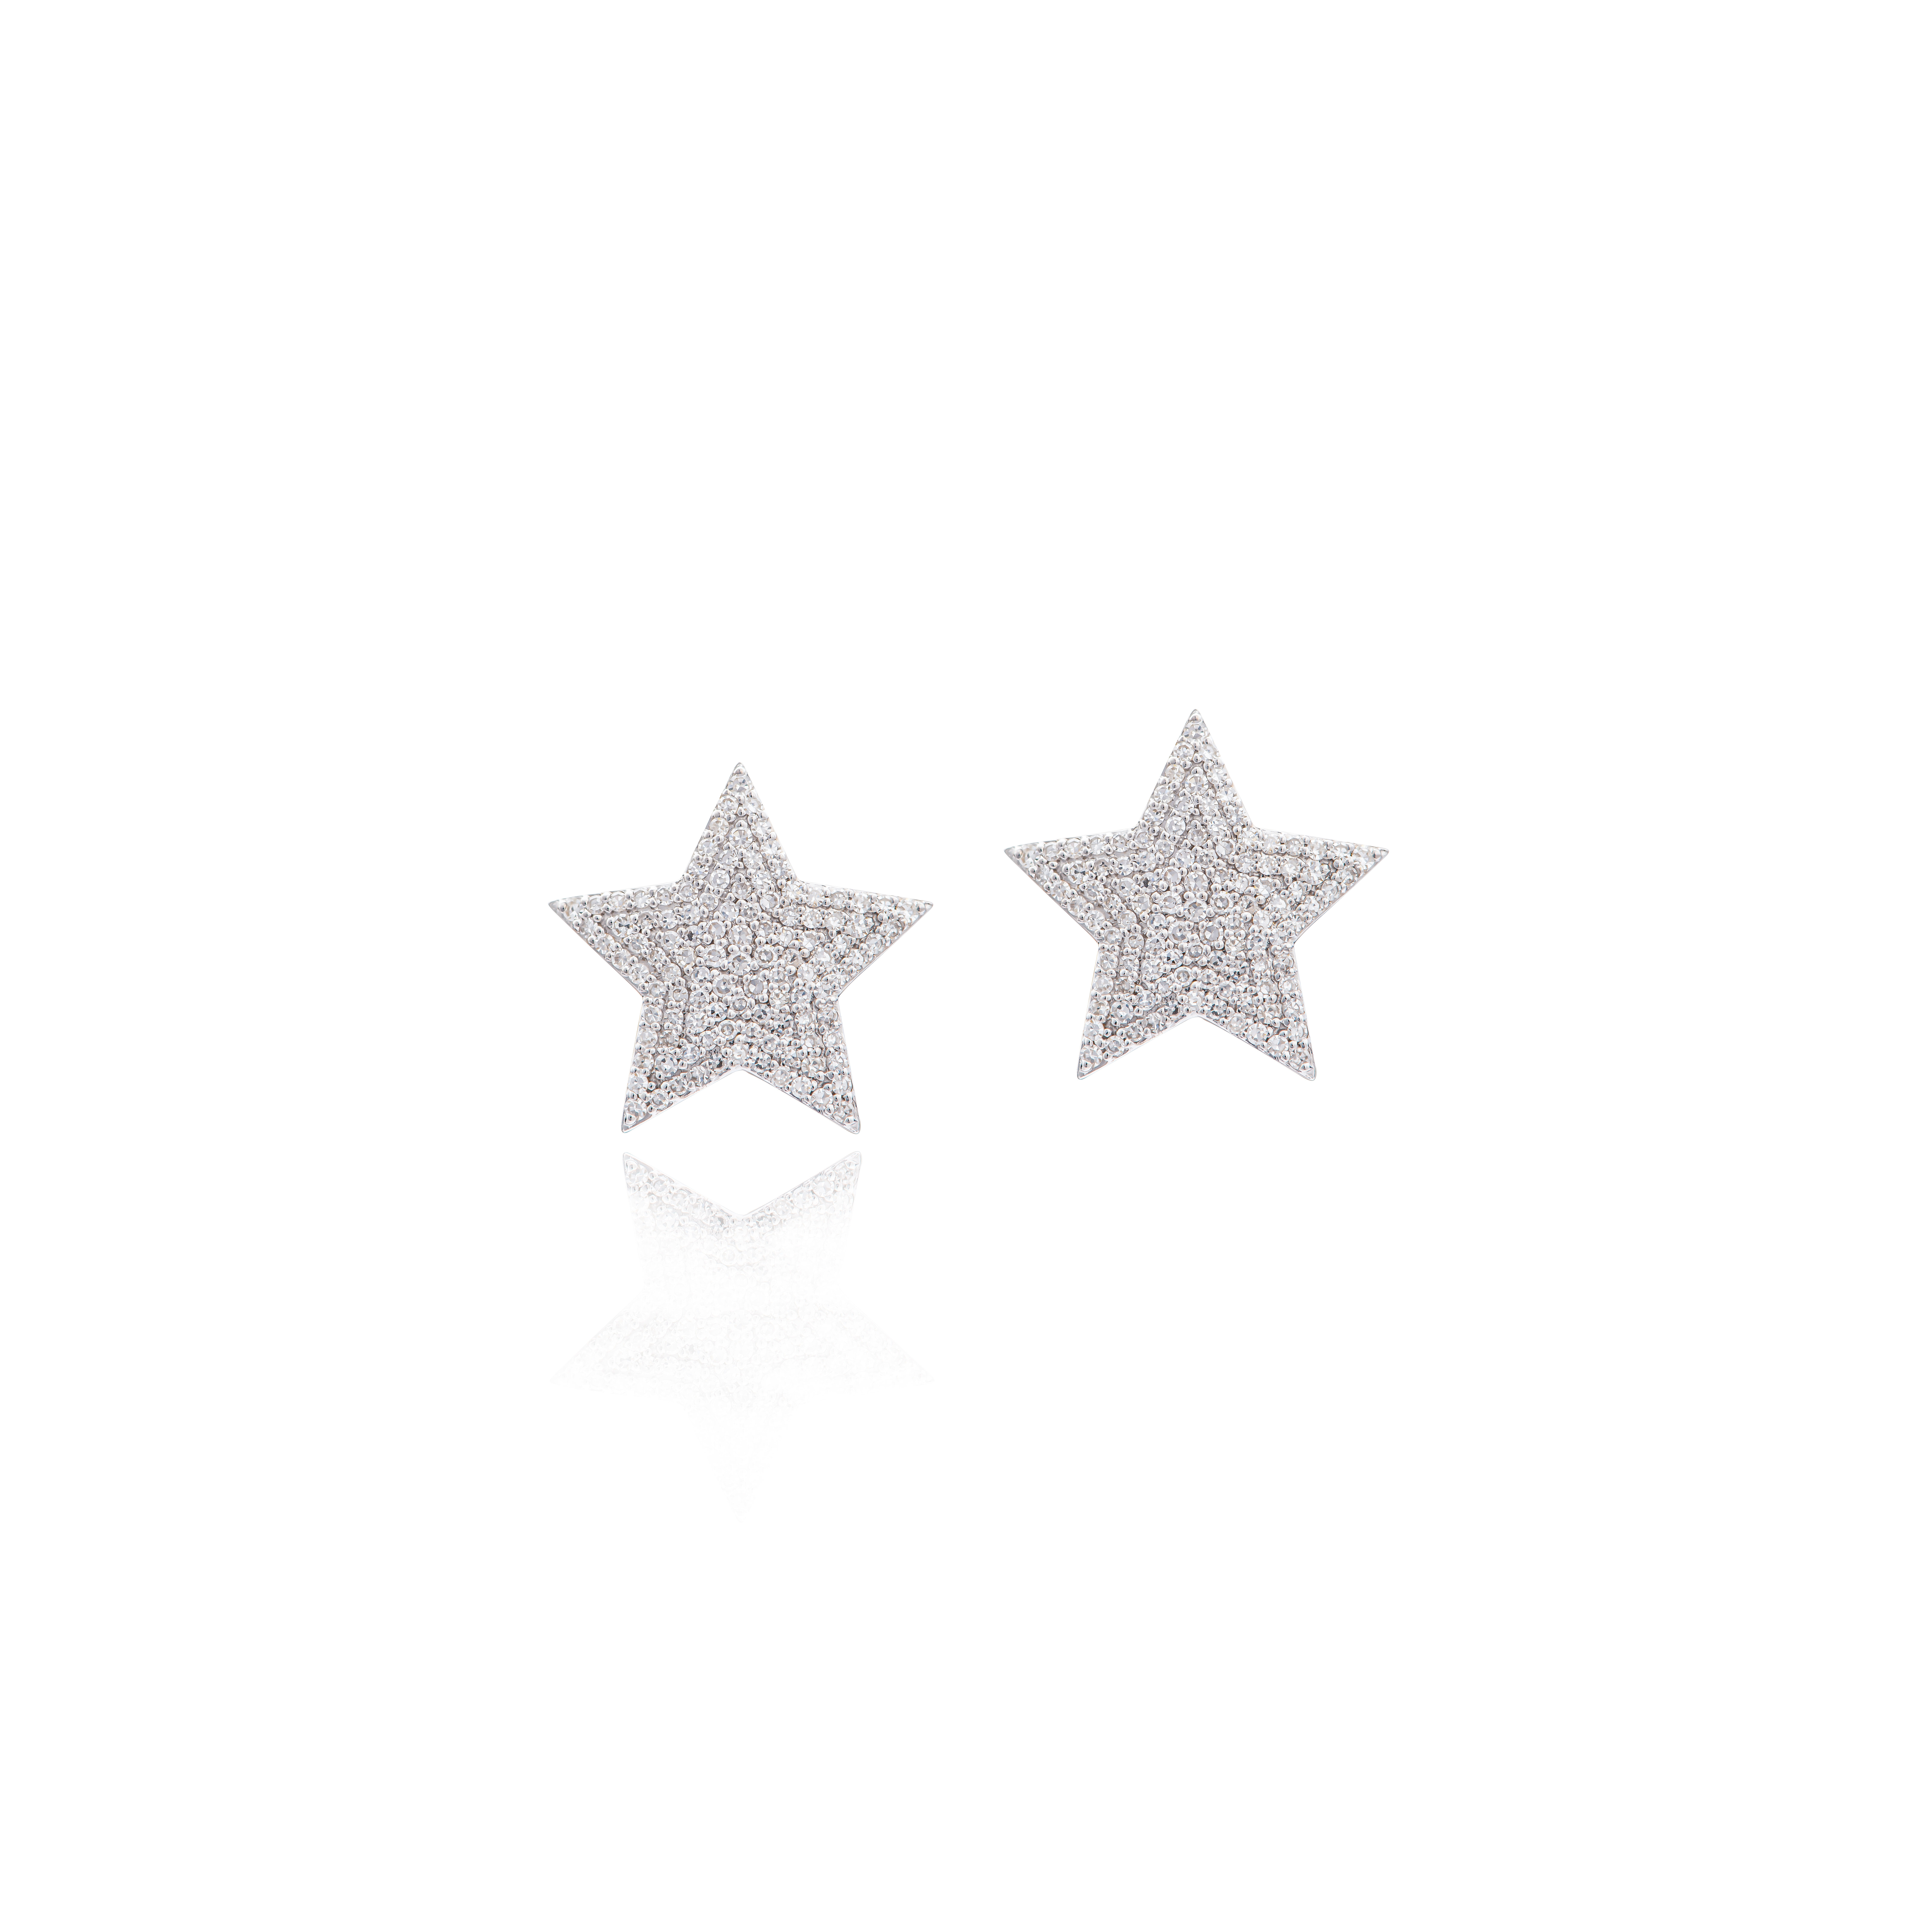 Phillips House Large Infinity Star Earrings at Meridian Jewelers